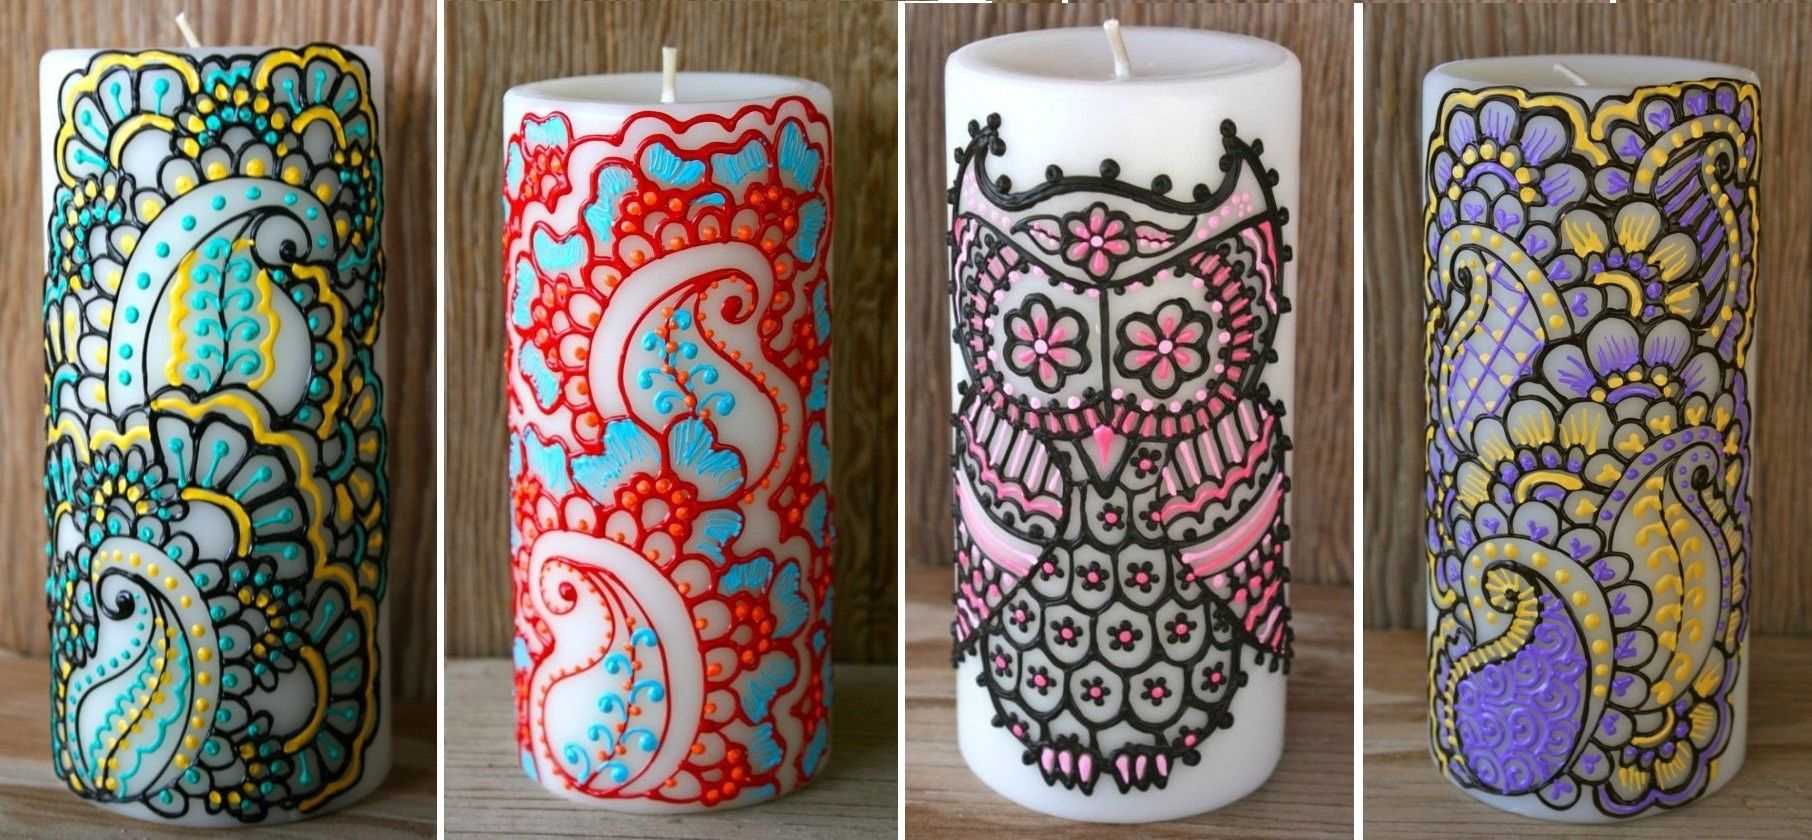 do-it-yourself version of the original candle decor